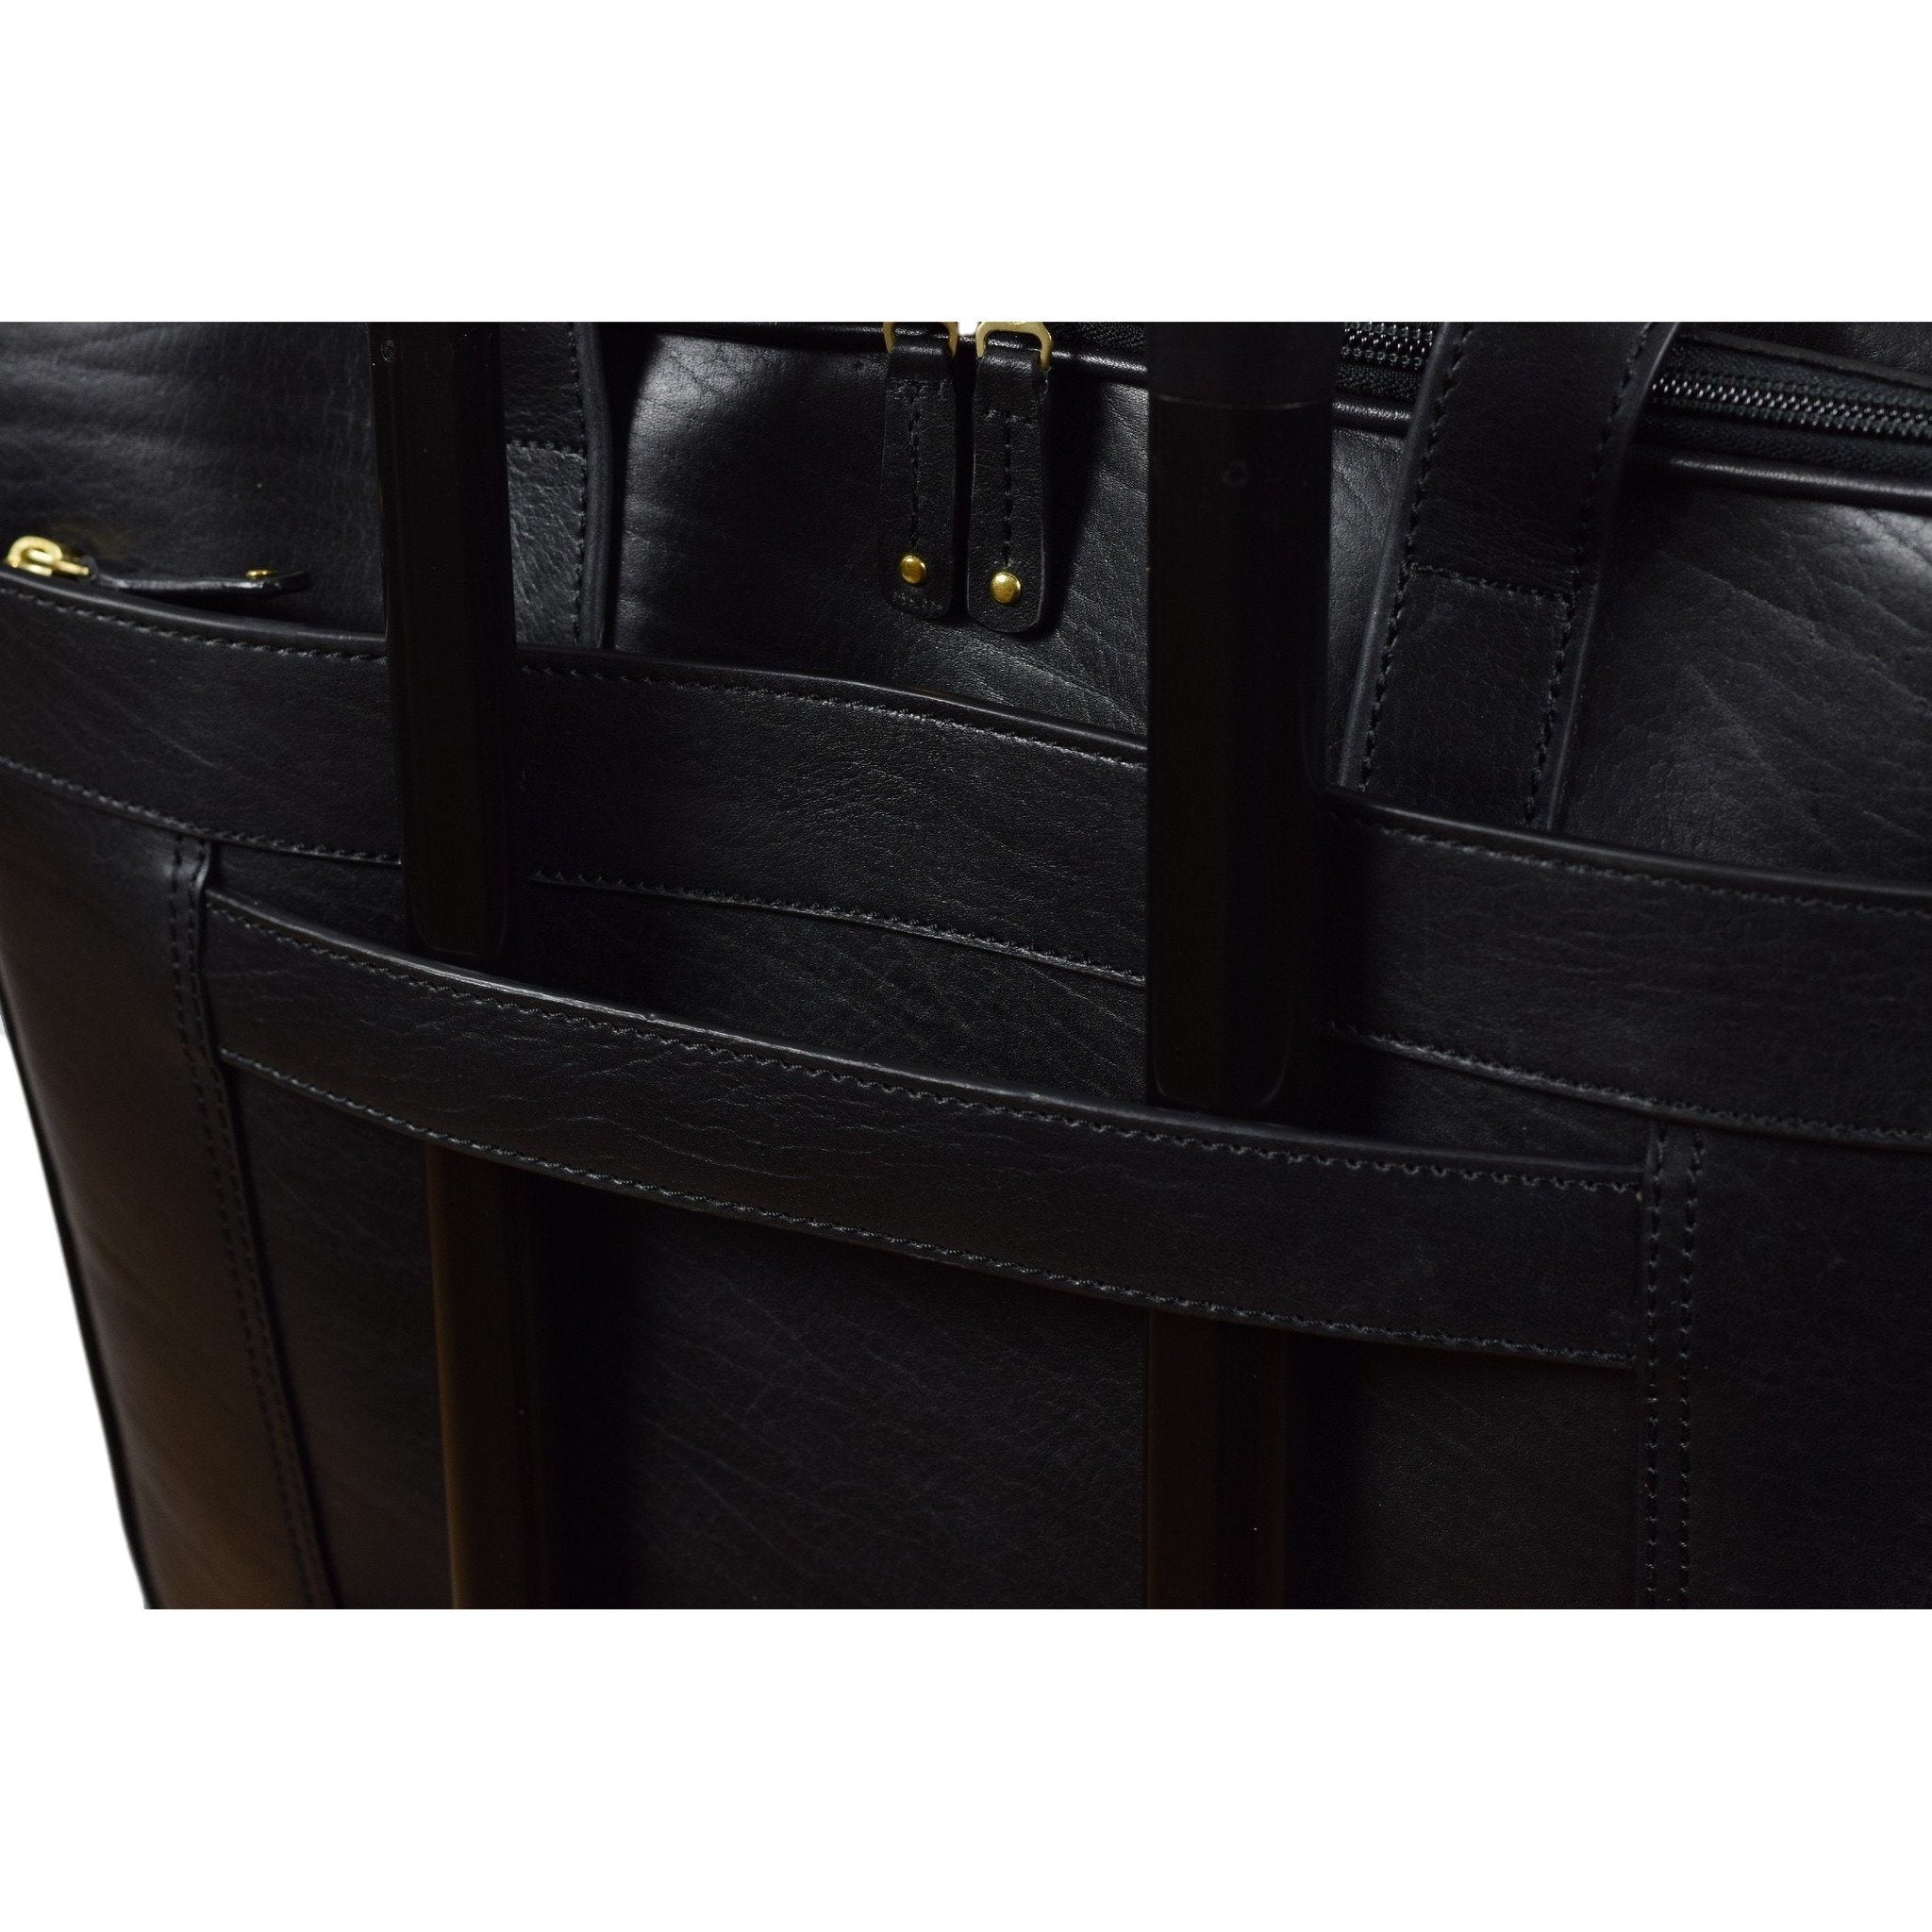 Limited Pro Brief, Briefcase | LAND Leather